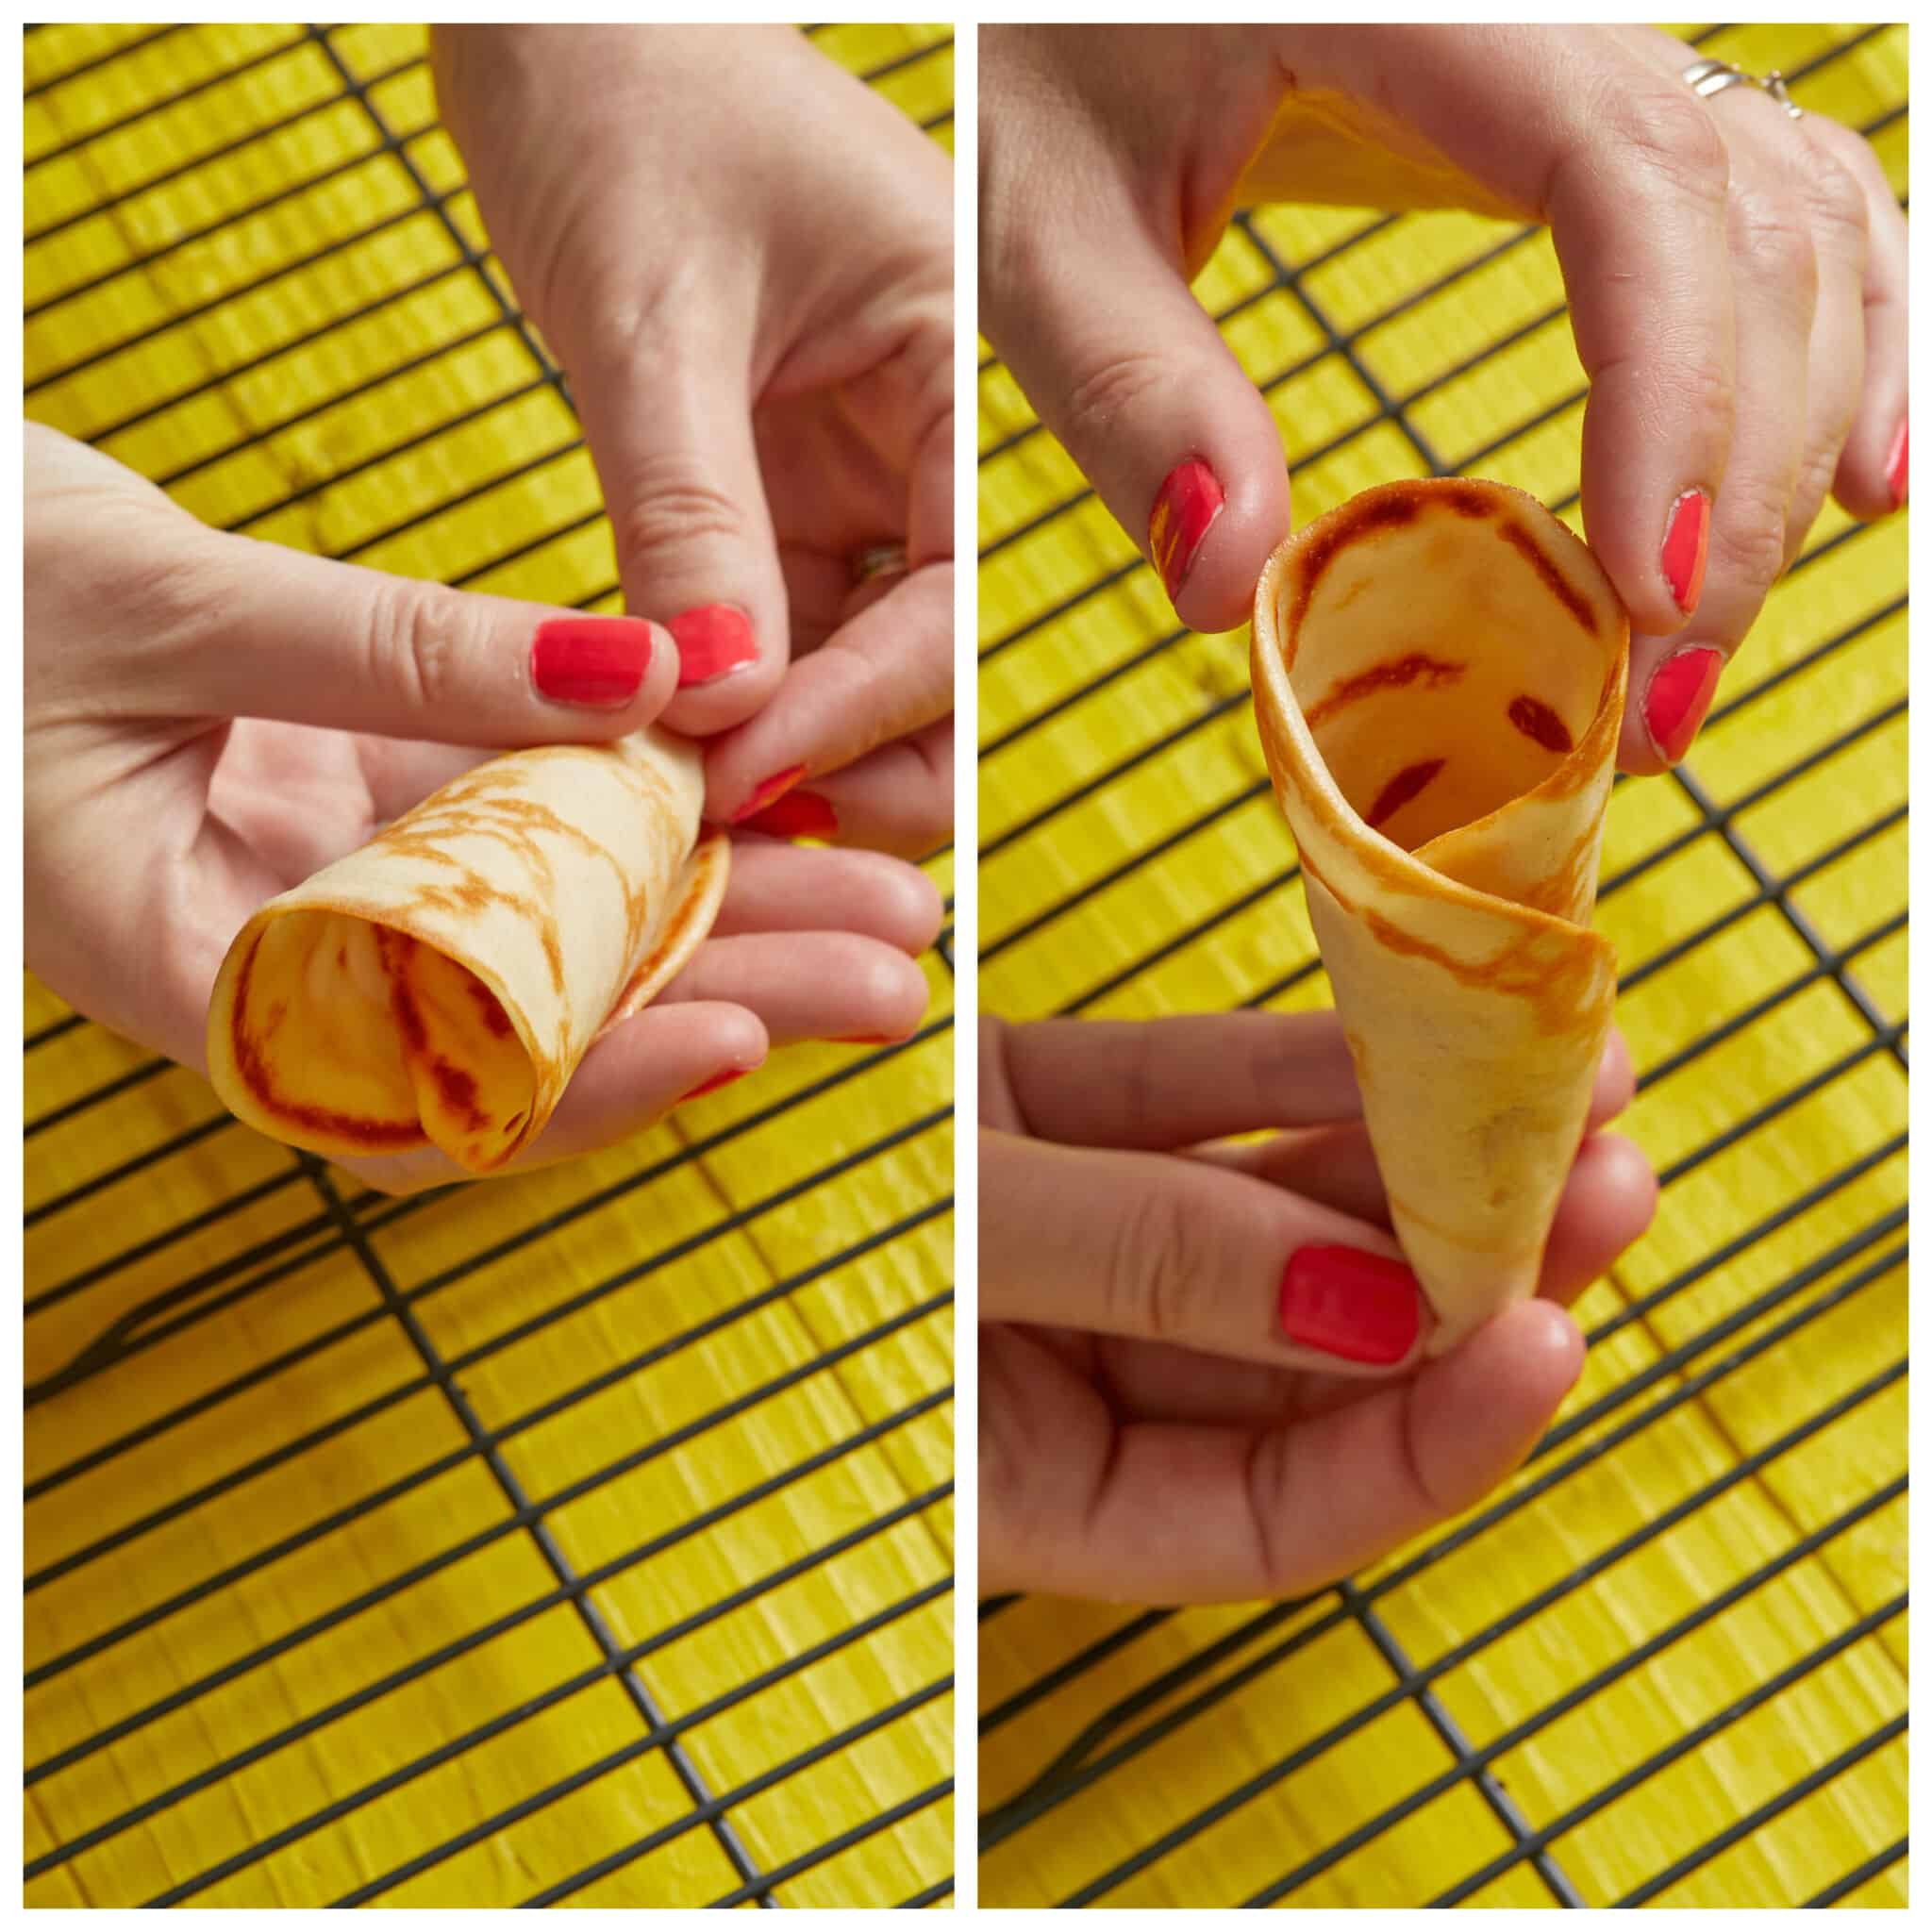 Step-by-step instruction on making ice cream cones. Shaping the cone over a wire cooling rack. Pinch the bottom together first, then roll it into a cone.